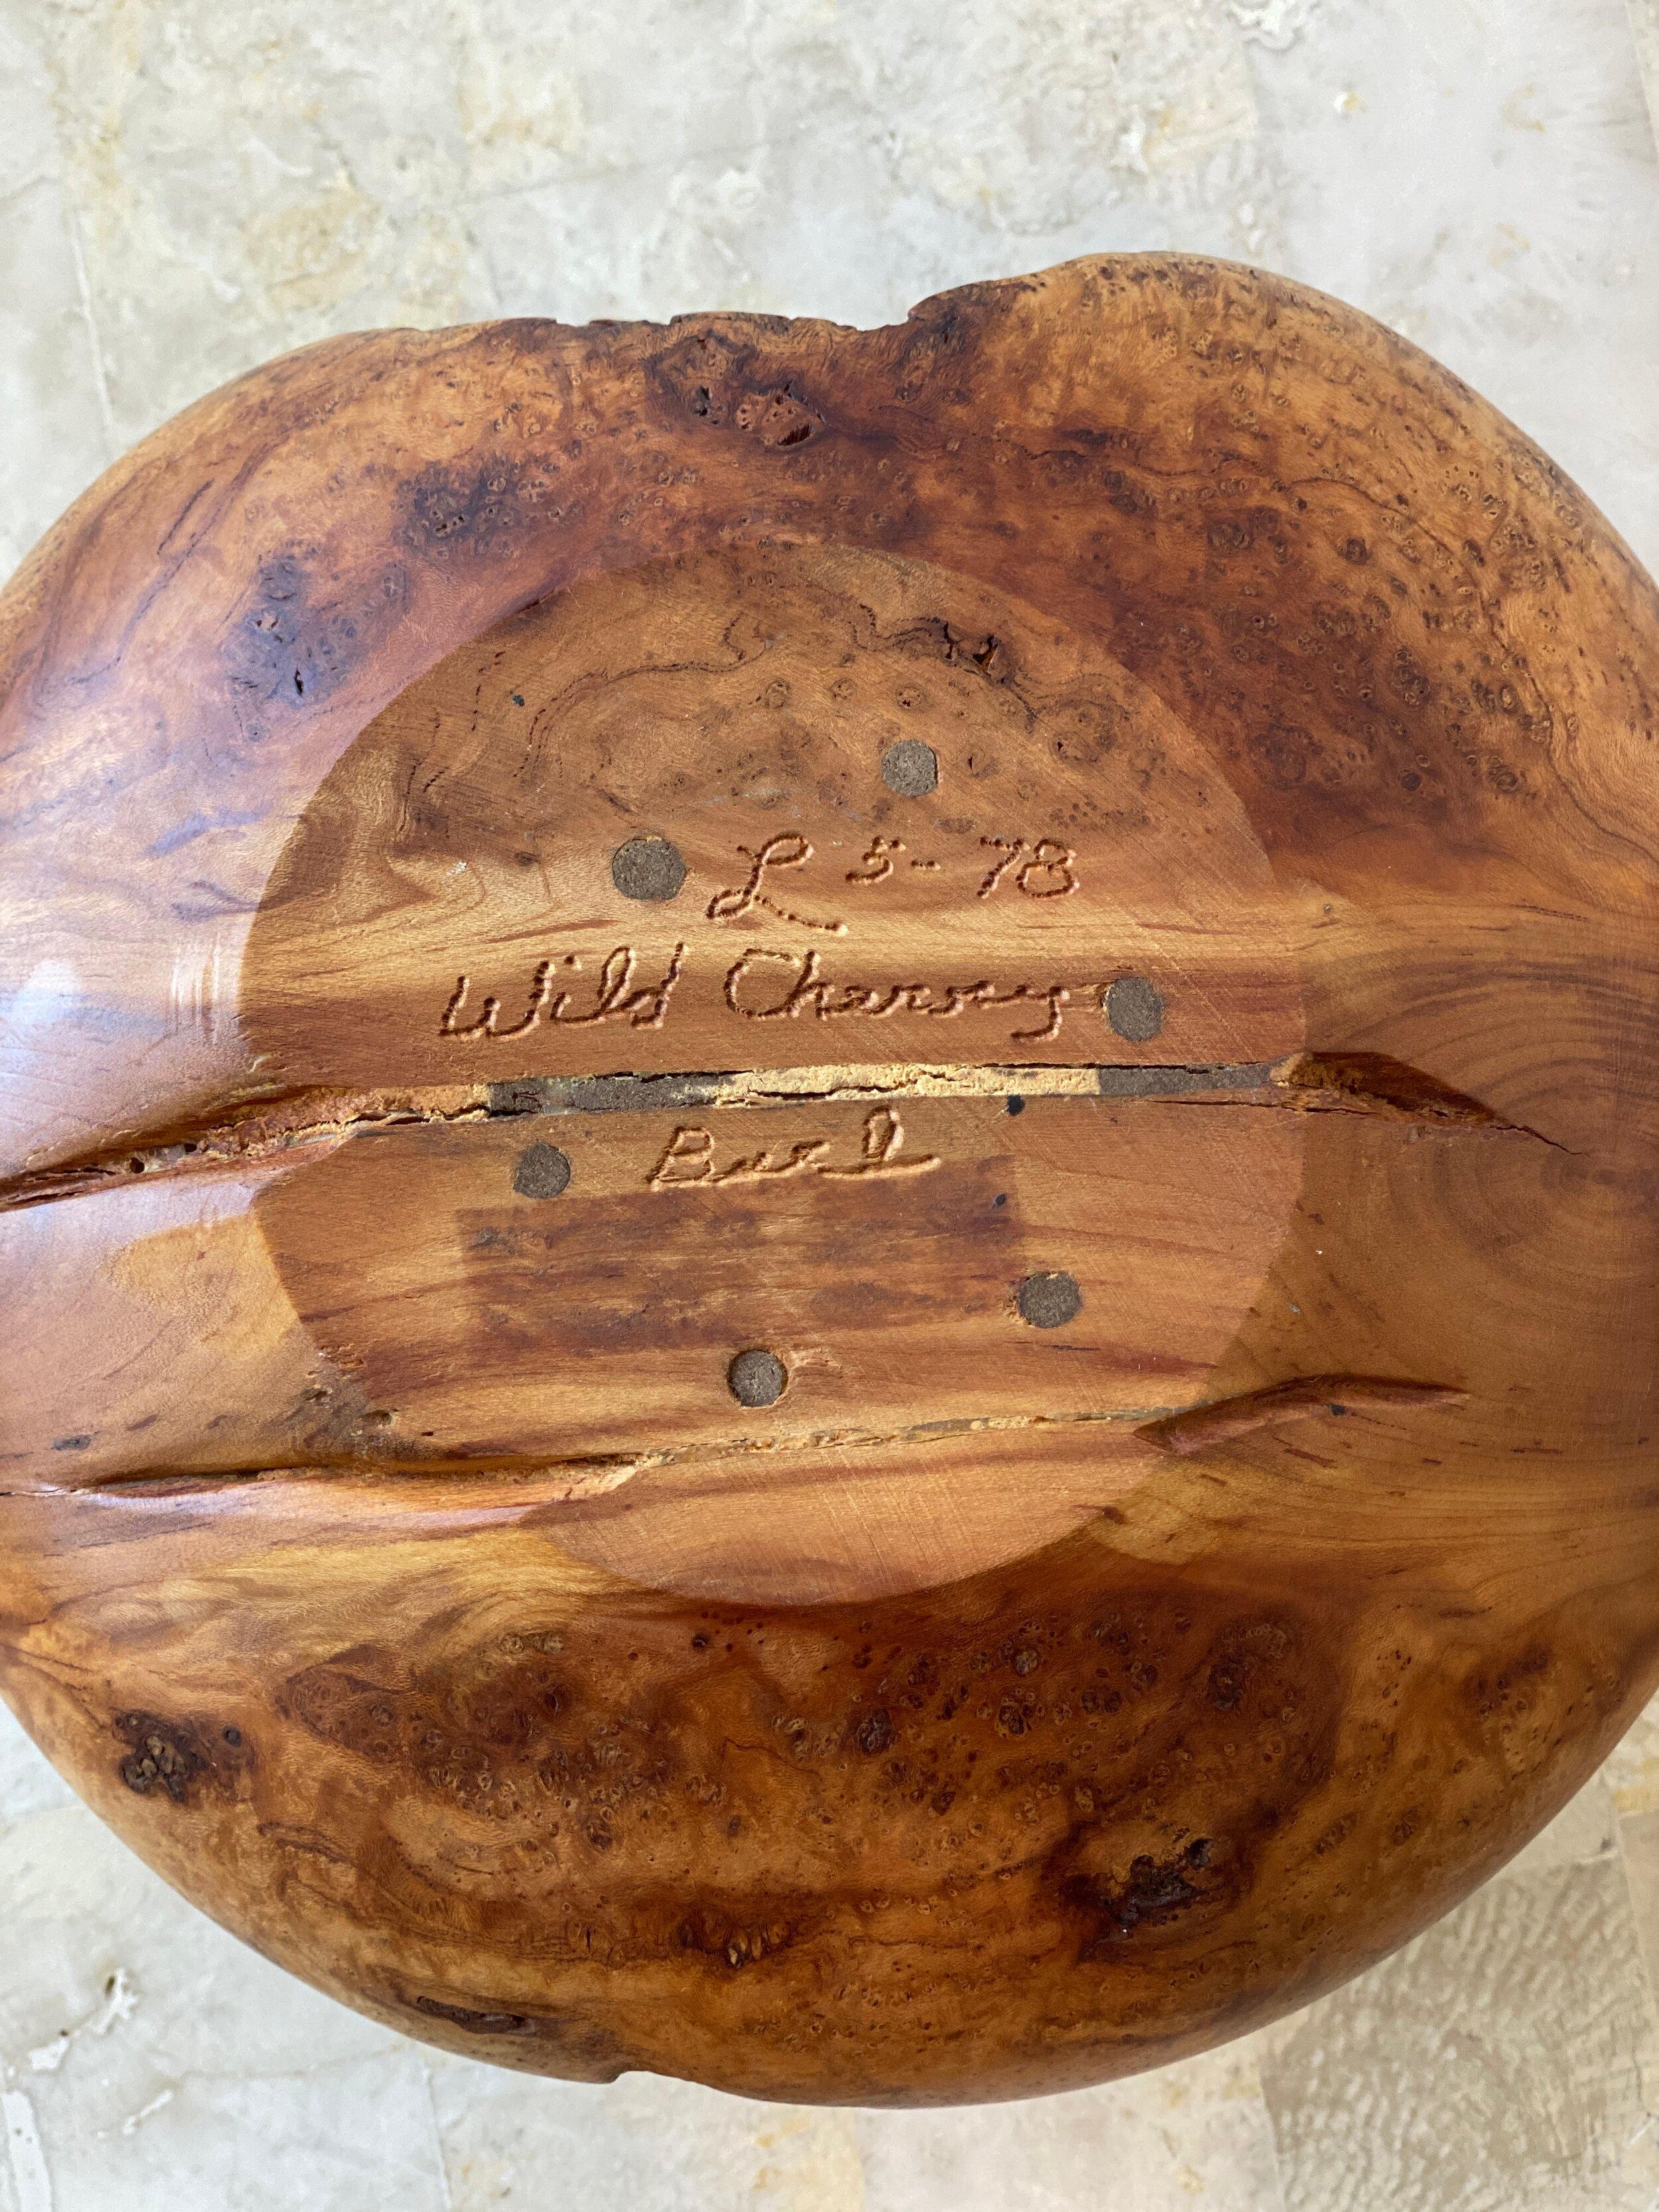 Melvin Lindquist Sculptural Turned Cherry Burl Wood Vase, Signed and Dated 1978 For Sale 3